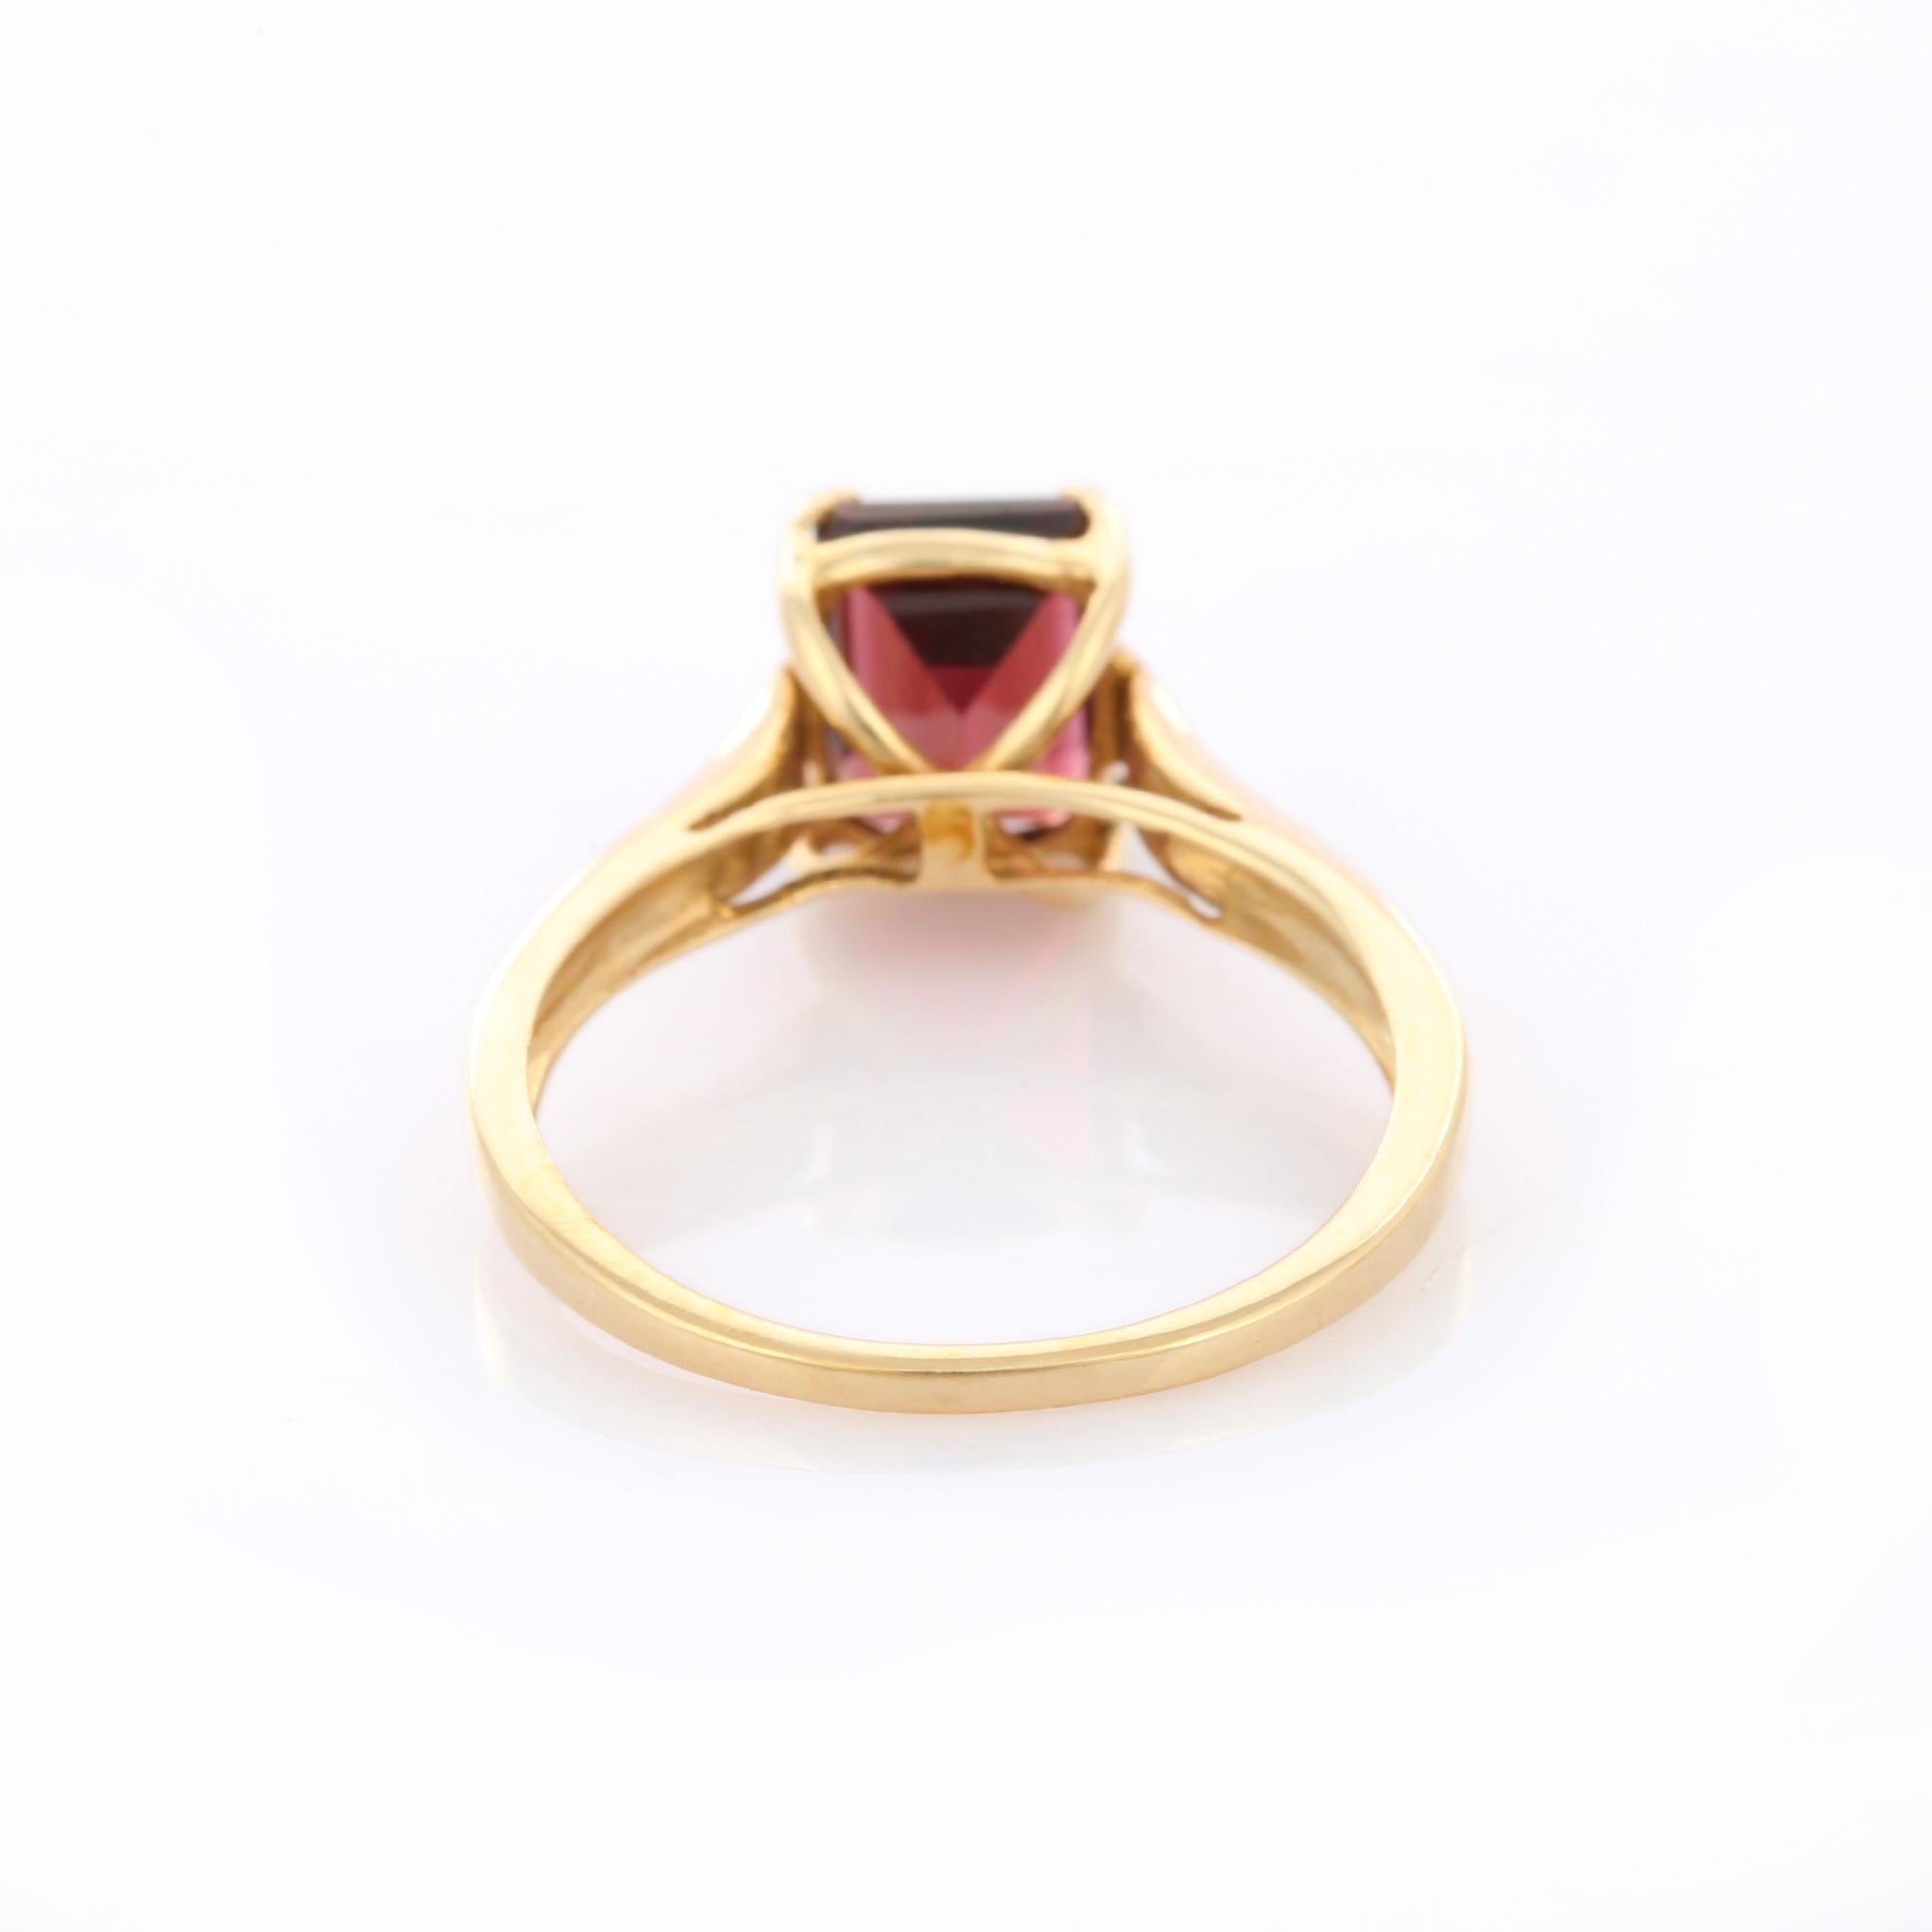 For Sale:  Octagon Cut Tourmaline Solitaire Ring in 14K Yellow Gold 5